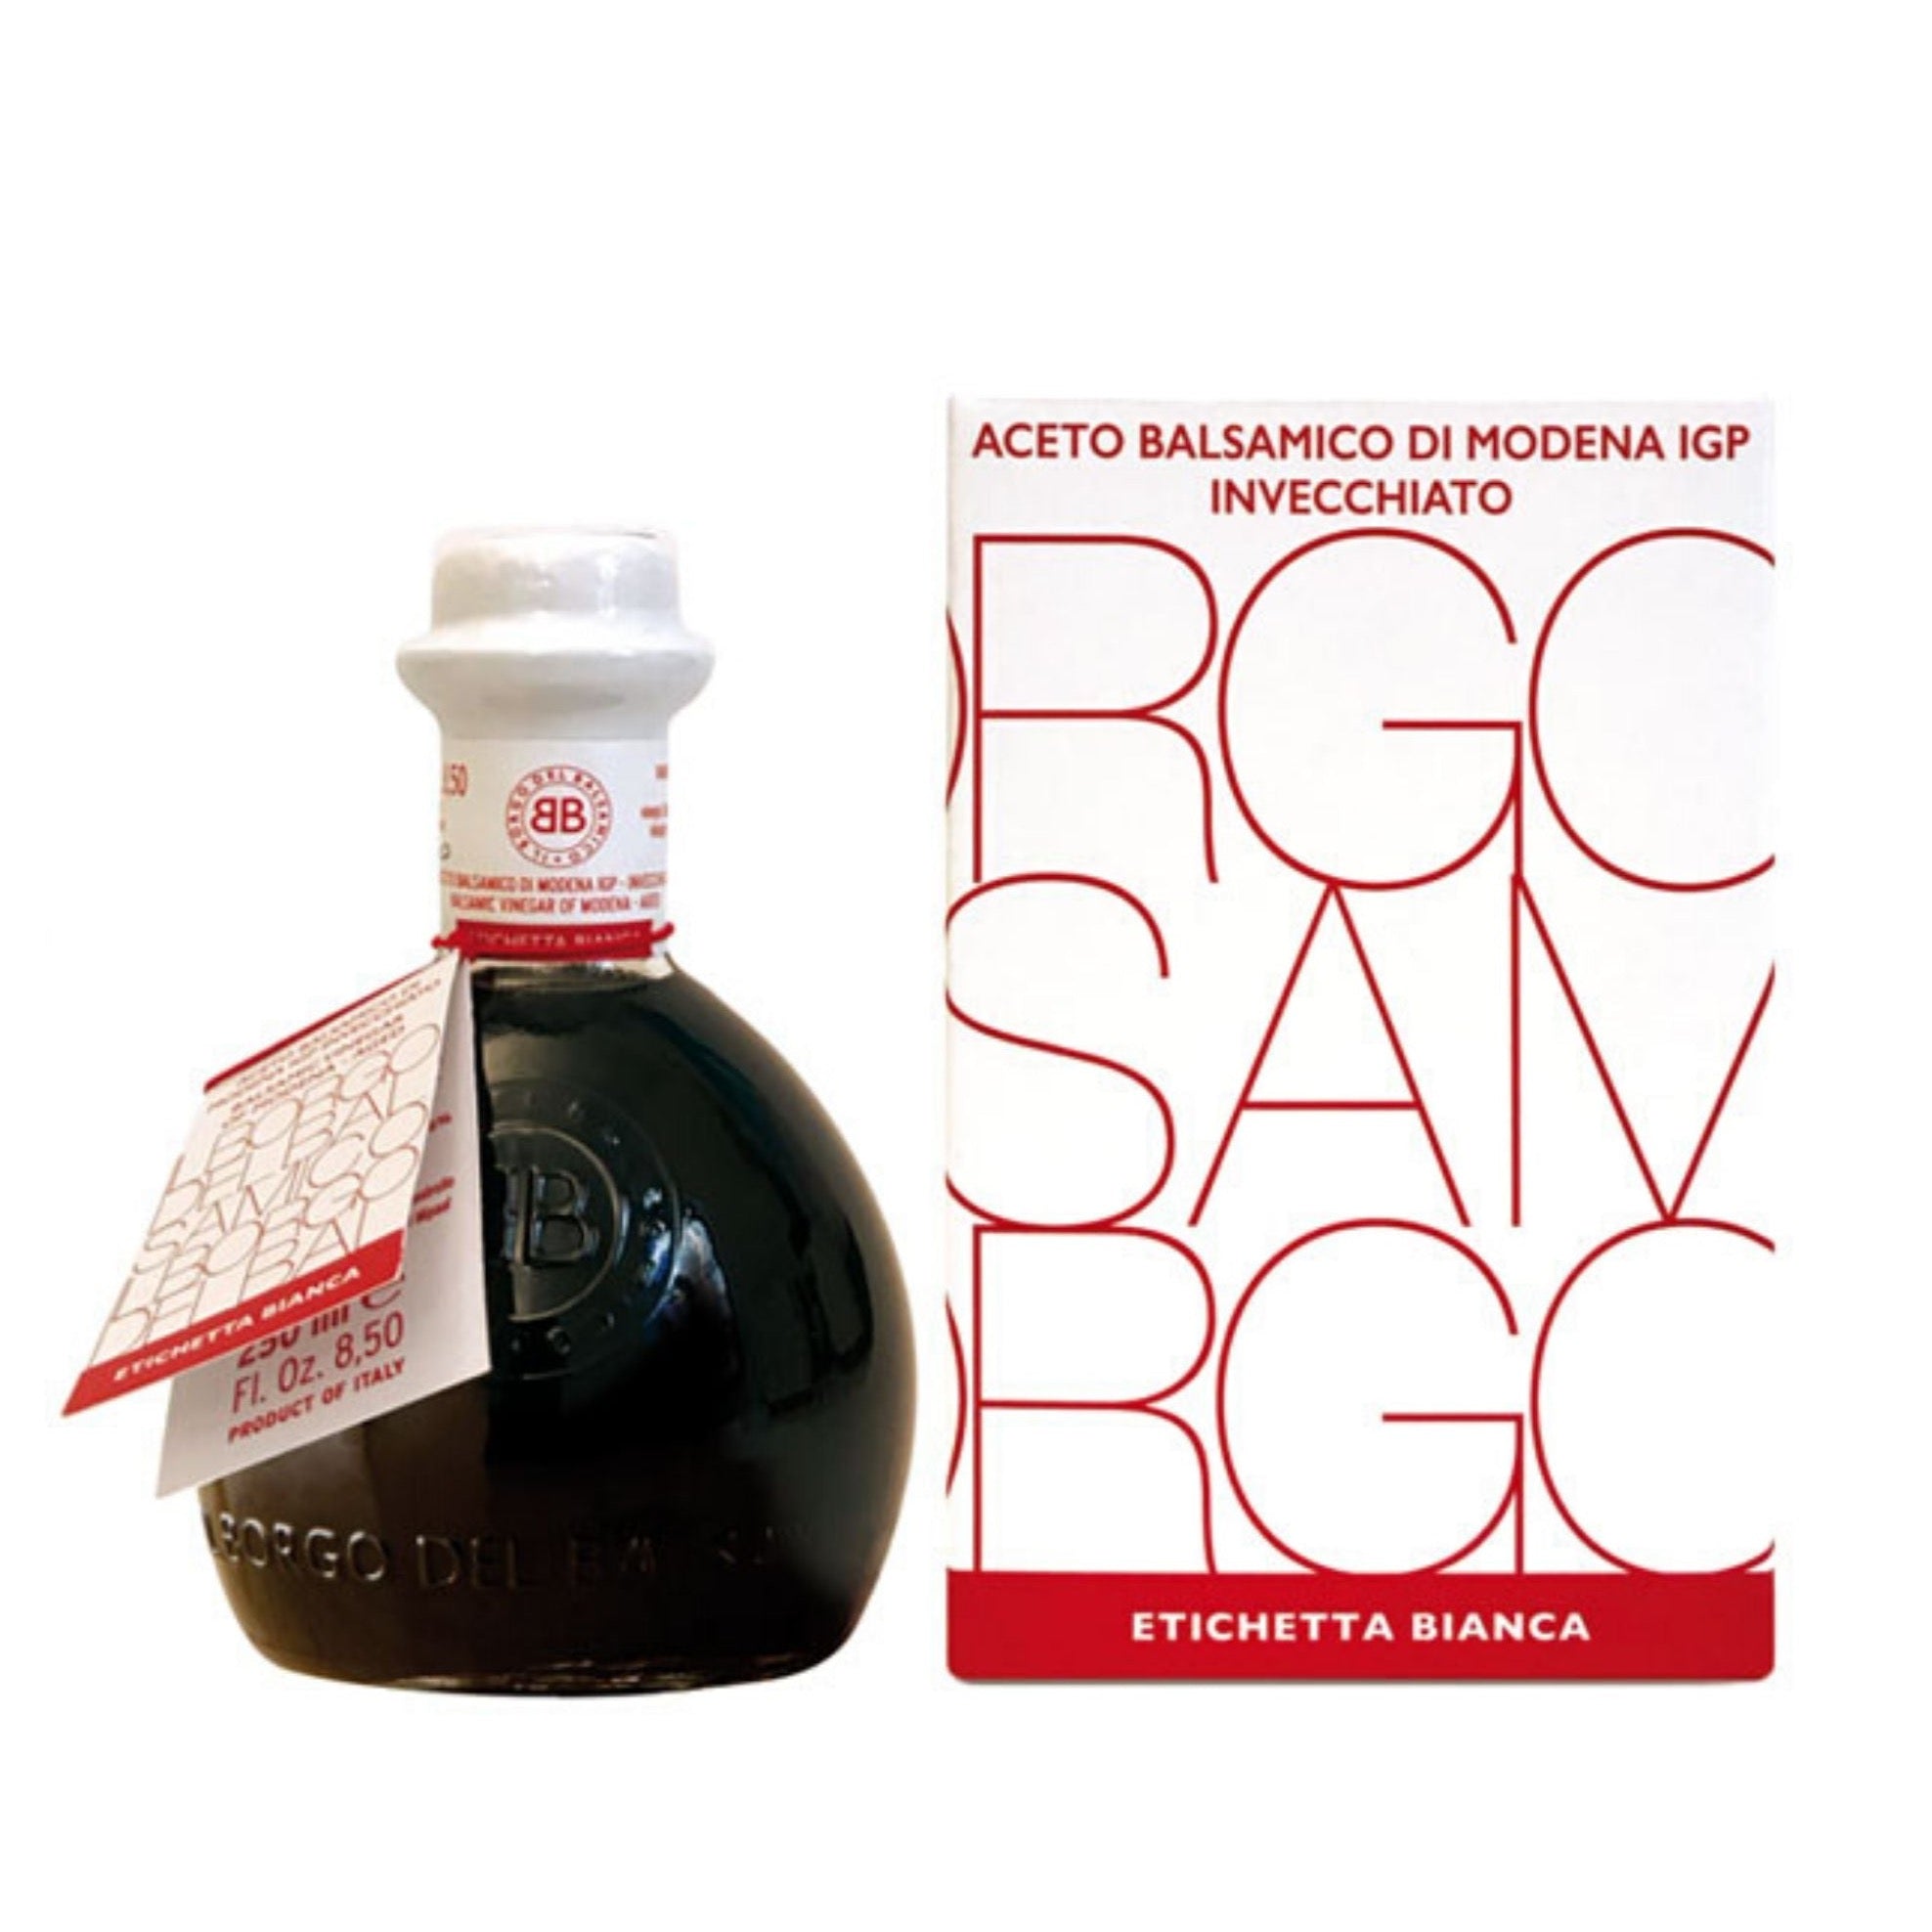 Il Borgo del Balsamico Balsamic Vinegar of Modena IGP Aged White Label High Acidity (Ampoule bottle with box) 250ml  | Imported and distributed in the UK by Just Gourmet Foods